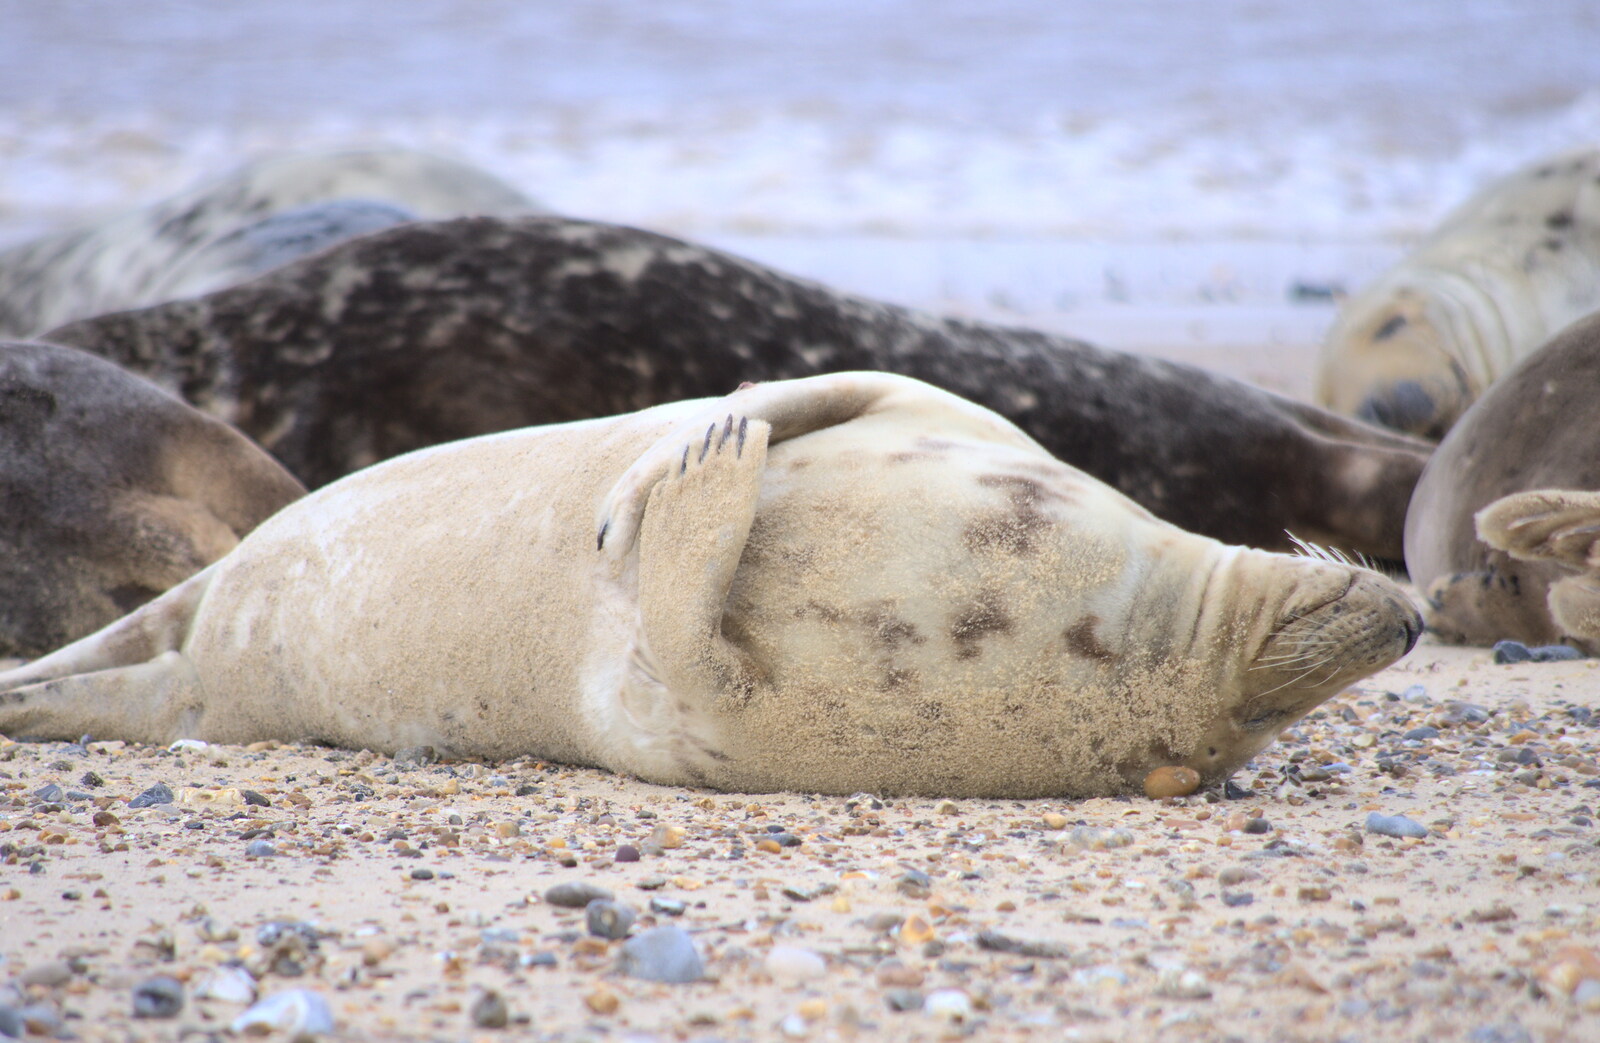 A seal rolls around from The Seals of Horsey Gap, Norfolk - 21st February 2016